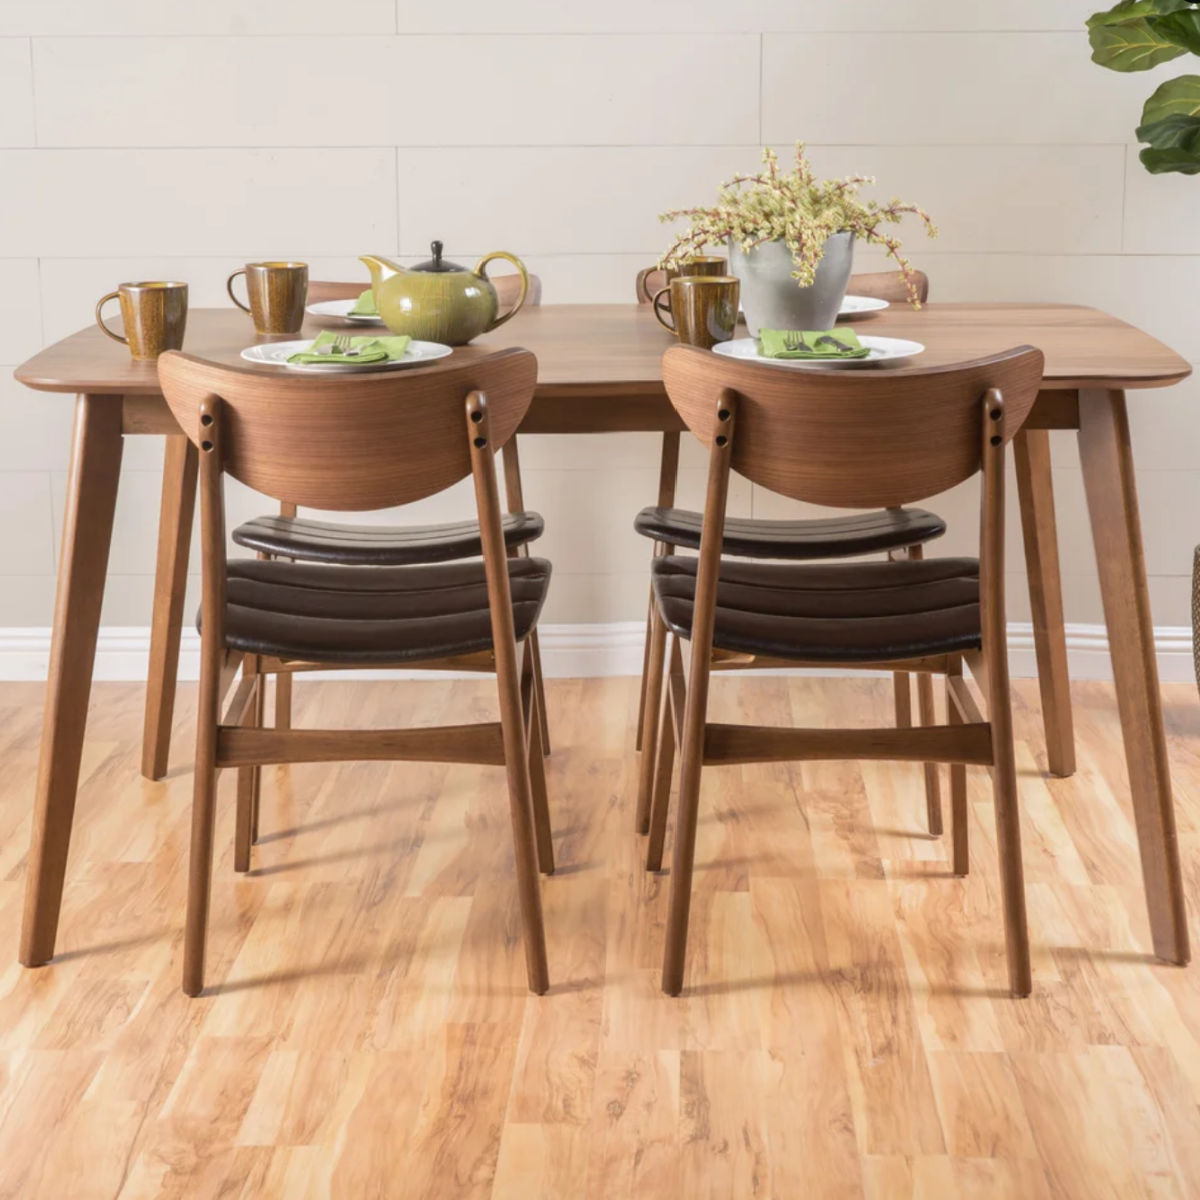 Christopher Knight Home Anise 5-piece Wood Rectangular Dining Set